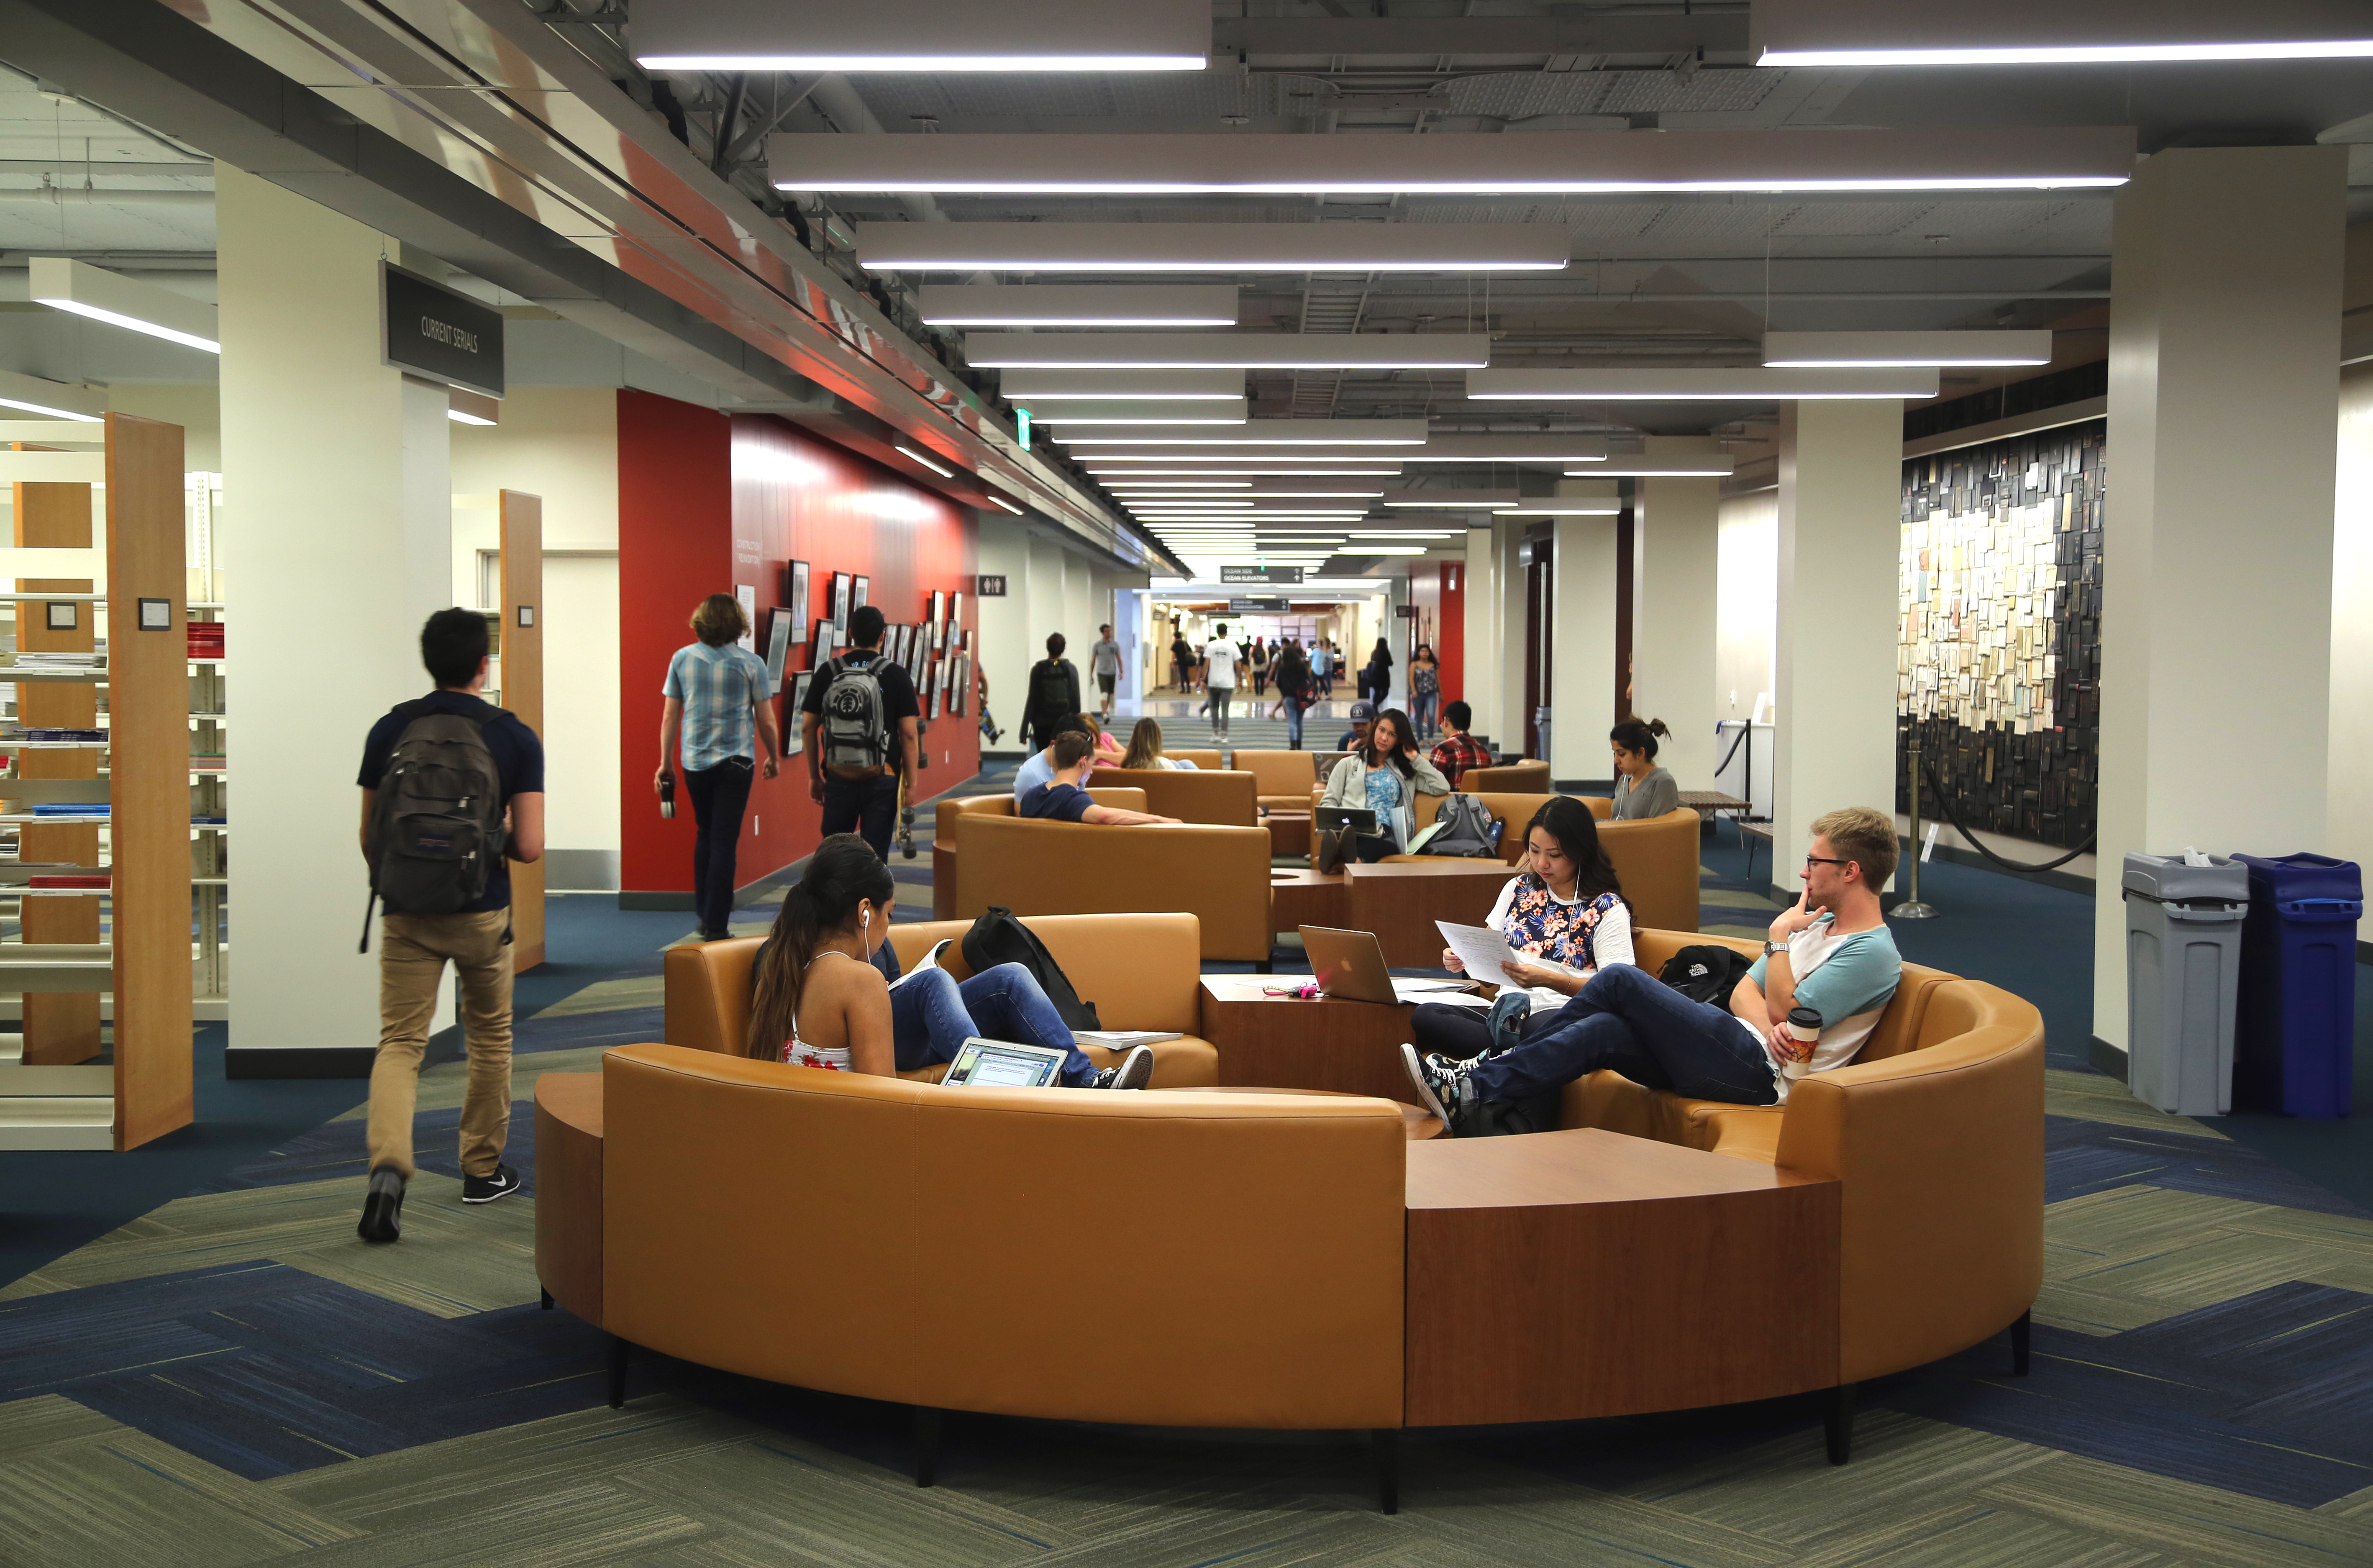 students sitting on circular couches in library